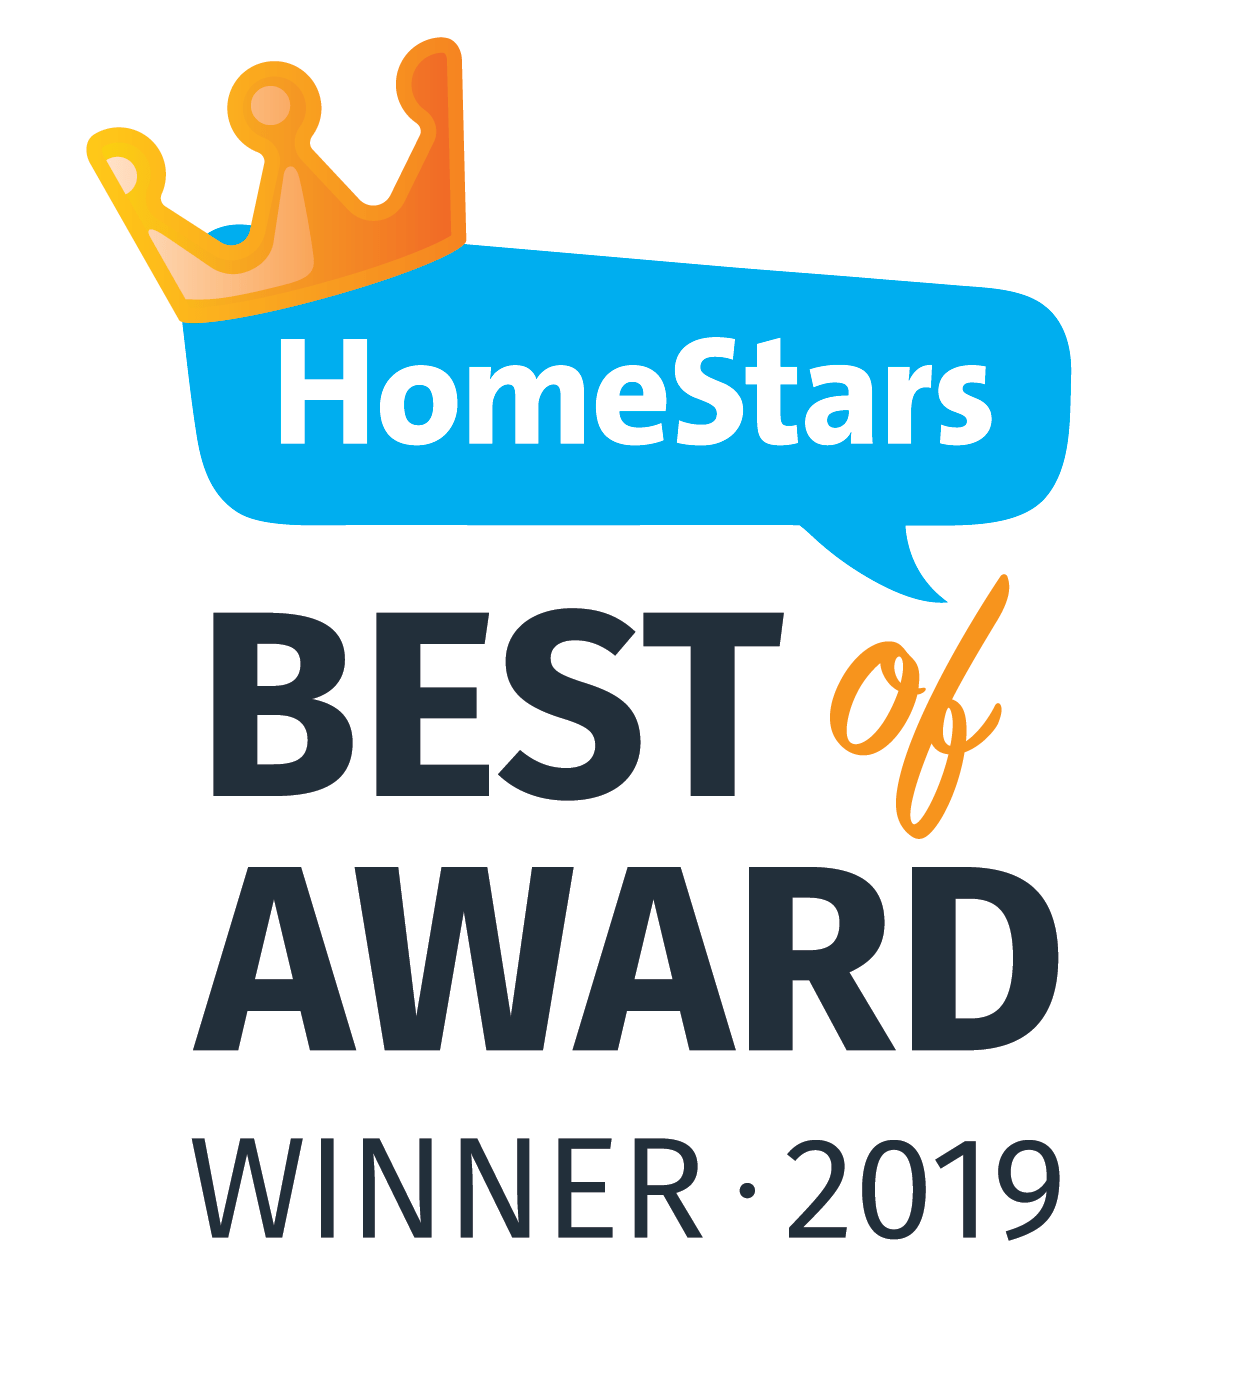 Chromatist Painters won the Best of the Best Award 2019 honours pros who have risen to the top of their fields by winning Best of Awards year after year. These pros deserve an extra special distinction.